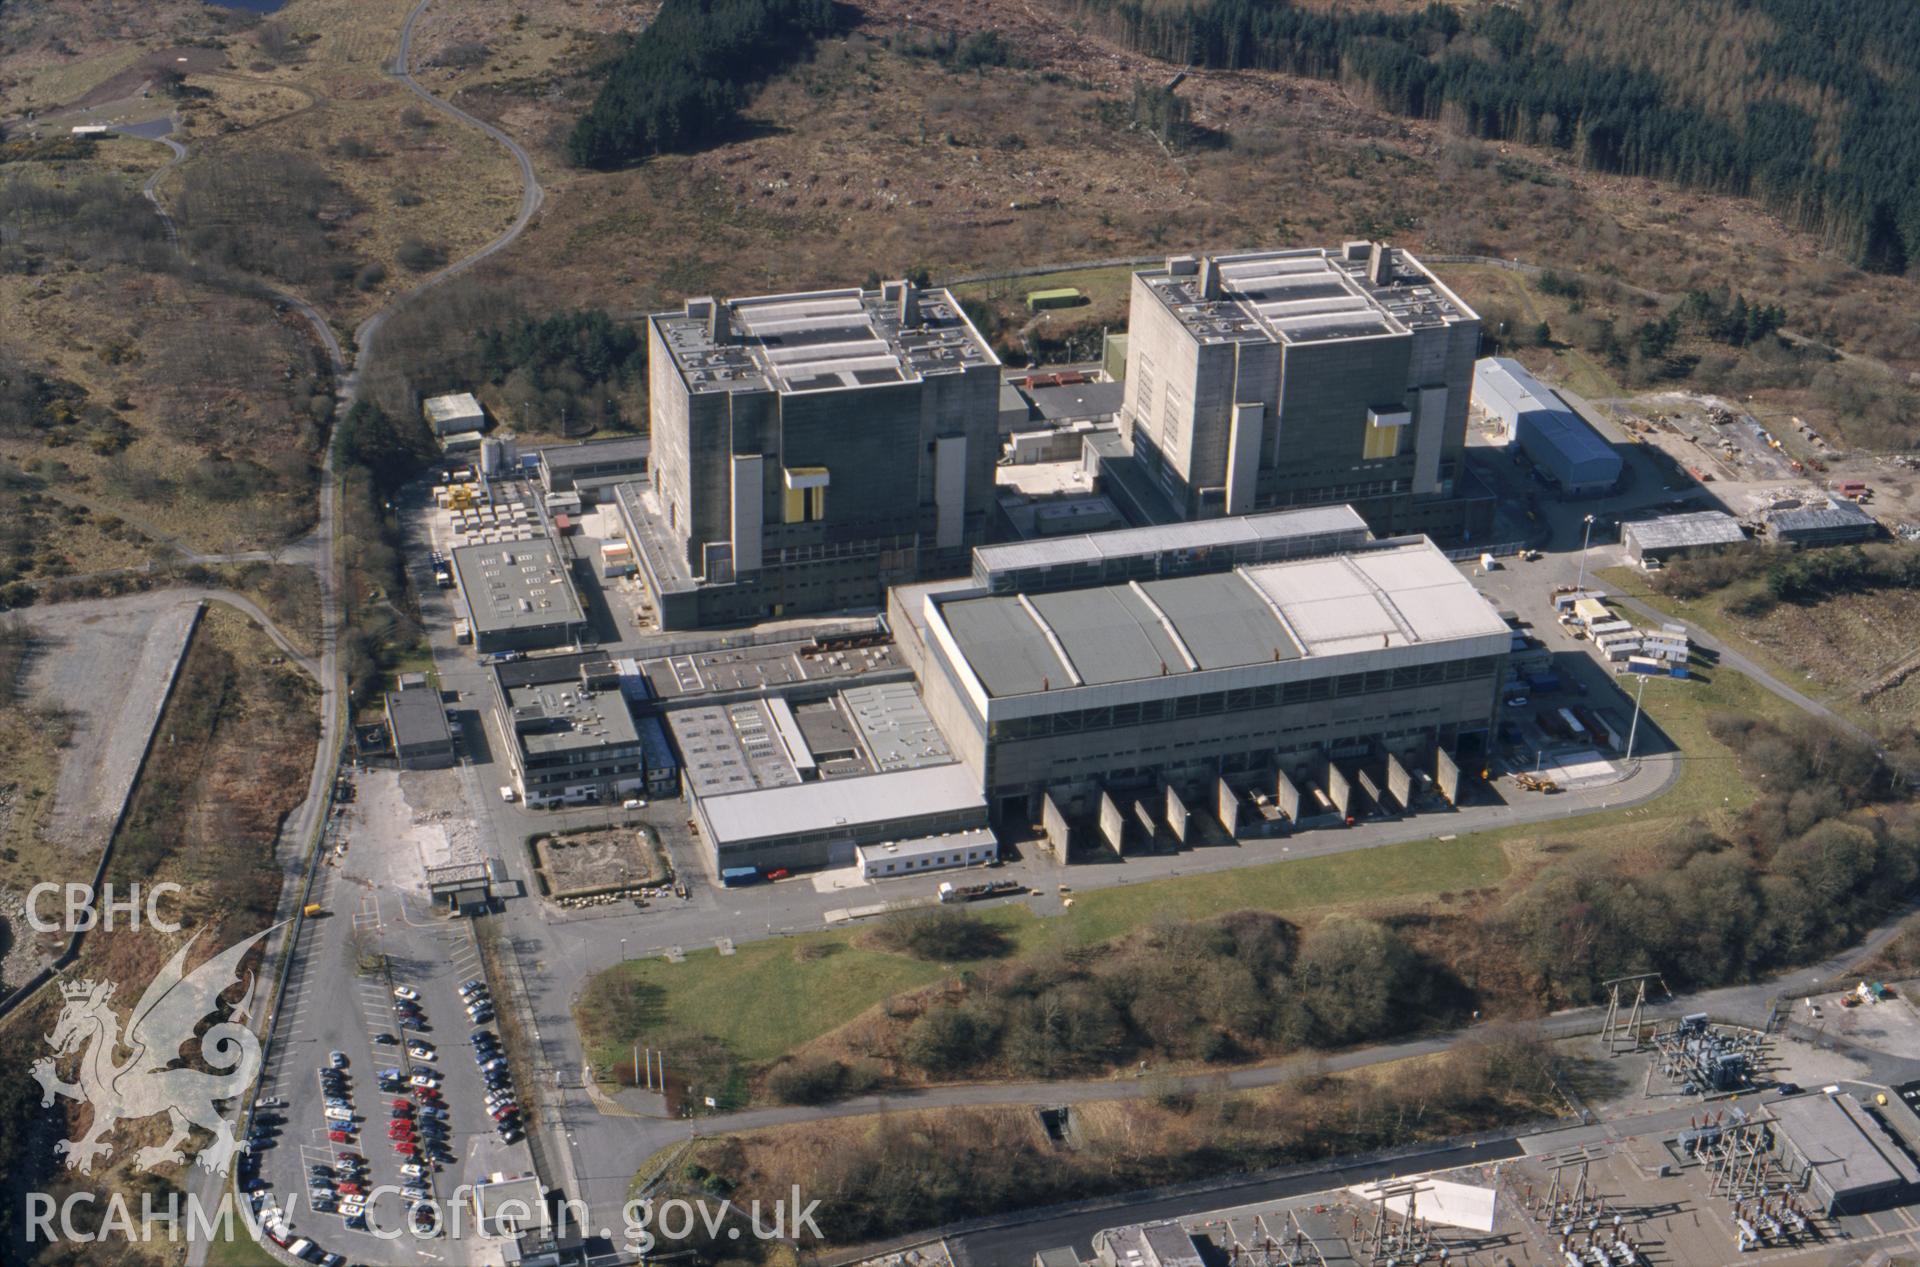 Slide of RCAHMW colour oblique aerial photograph of Trawsfynydd Power Station, taken by T.G. Driver, 30/3/2000.